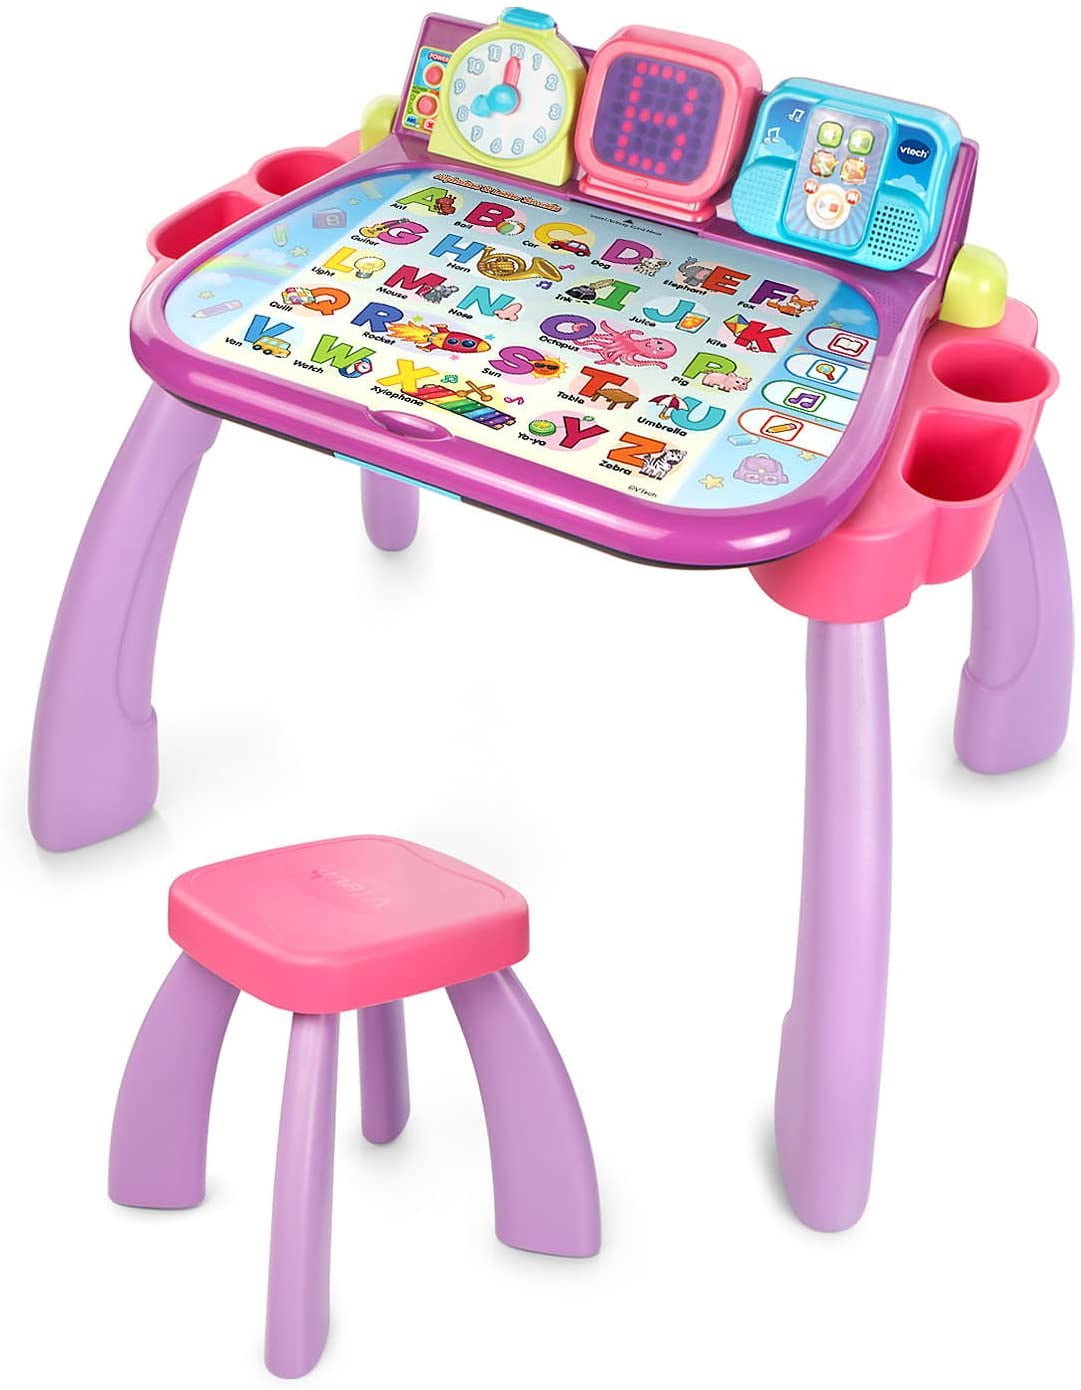 Pink for sale online VTech Touch and Learn Activity Desk Deluxe 